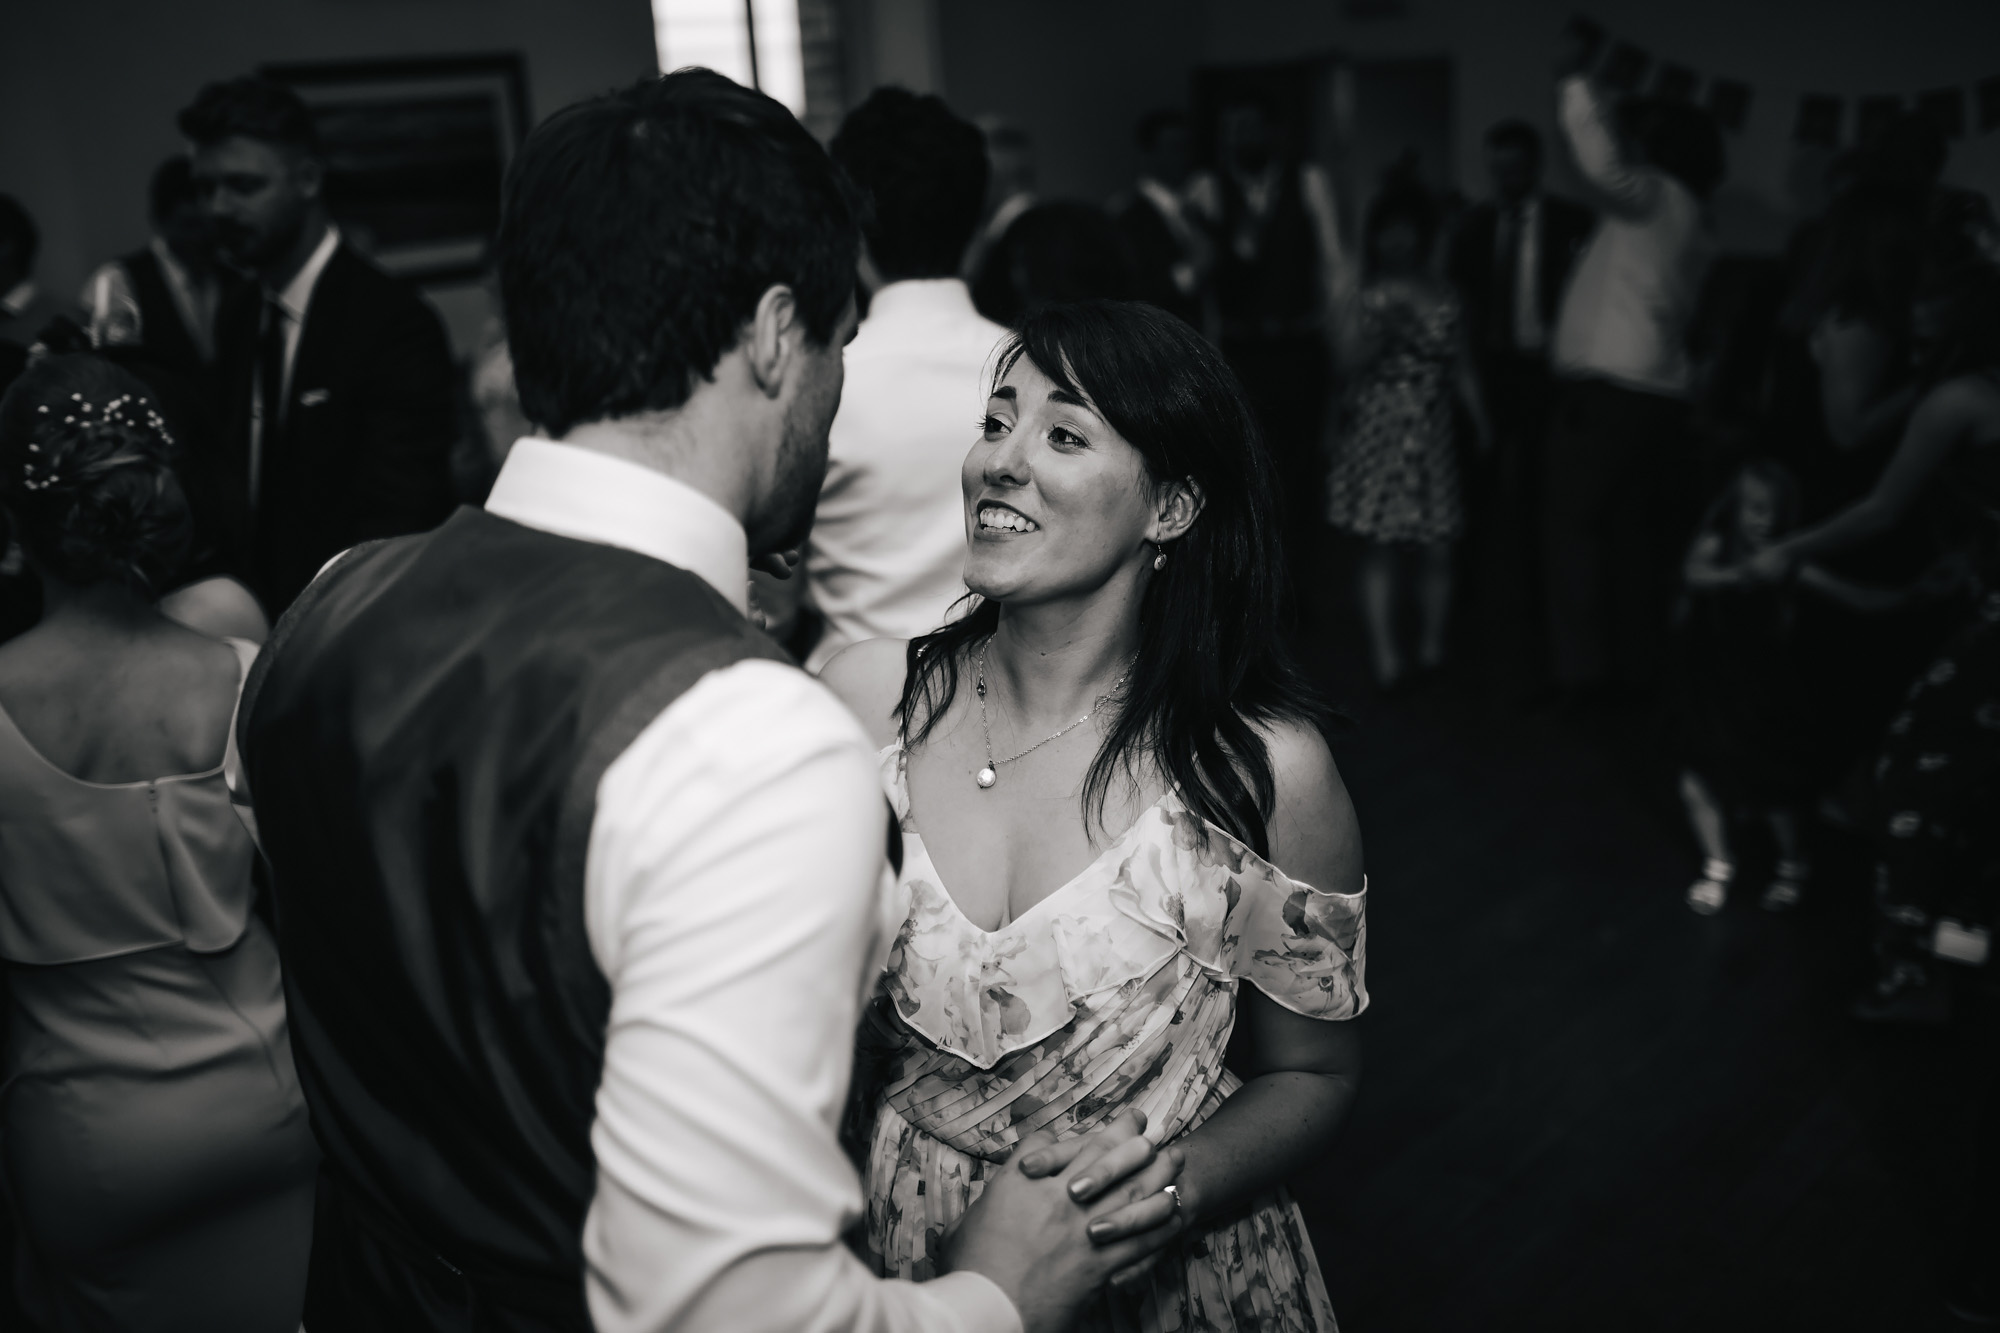 Wedding guests dancing at a village hall in Lancashire